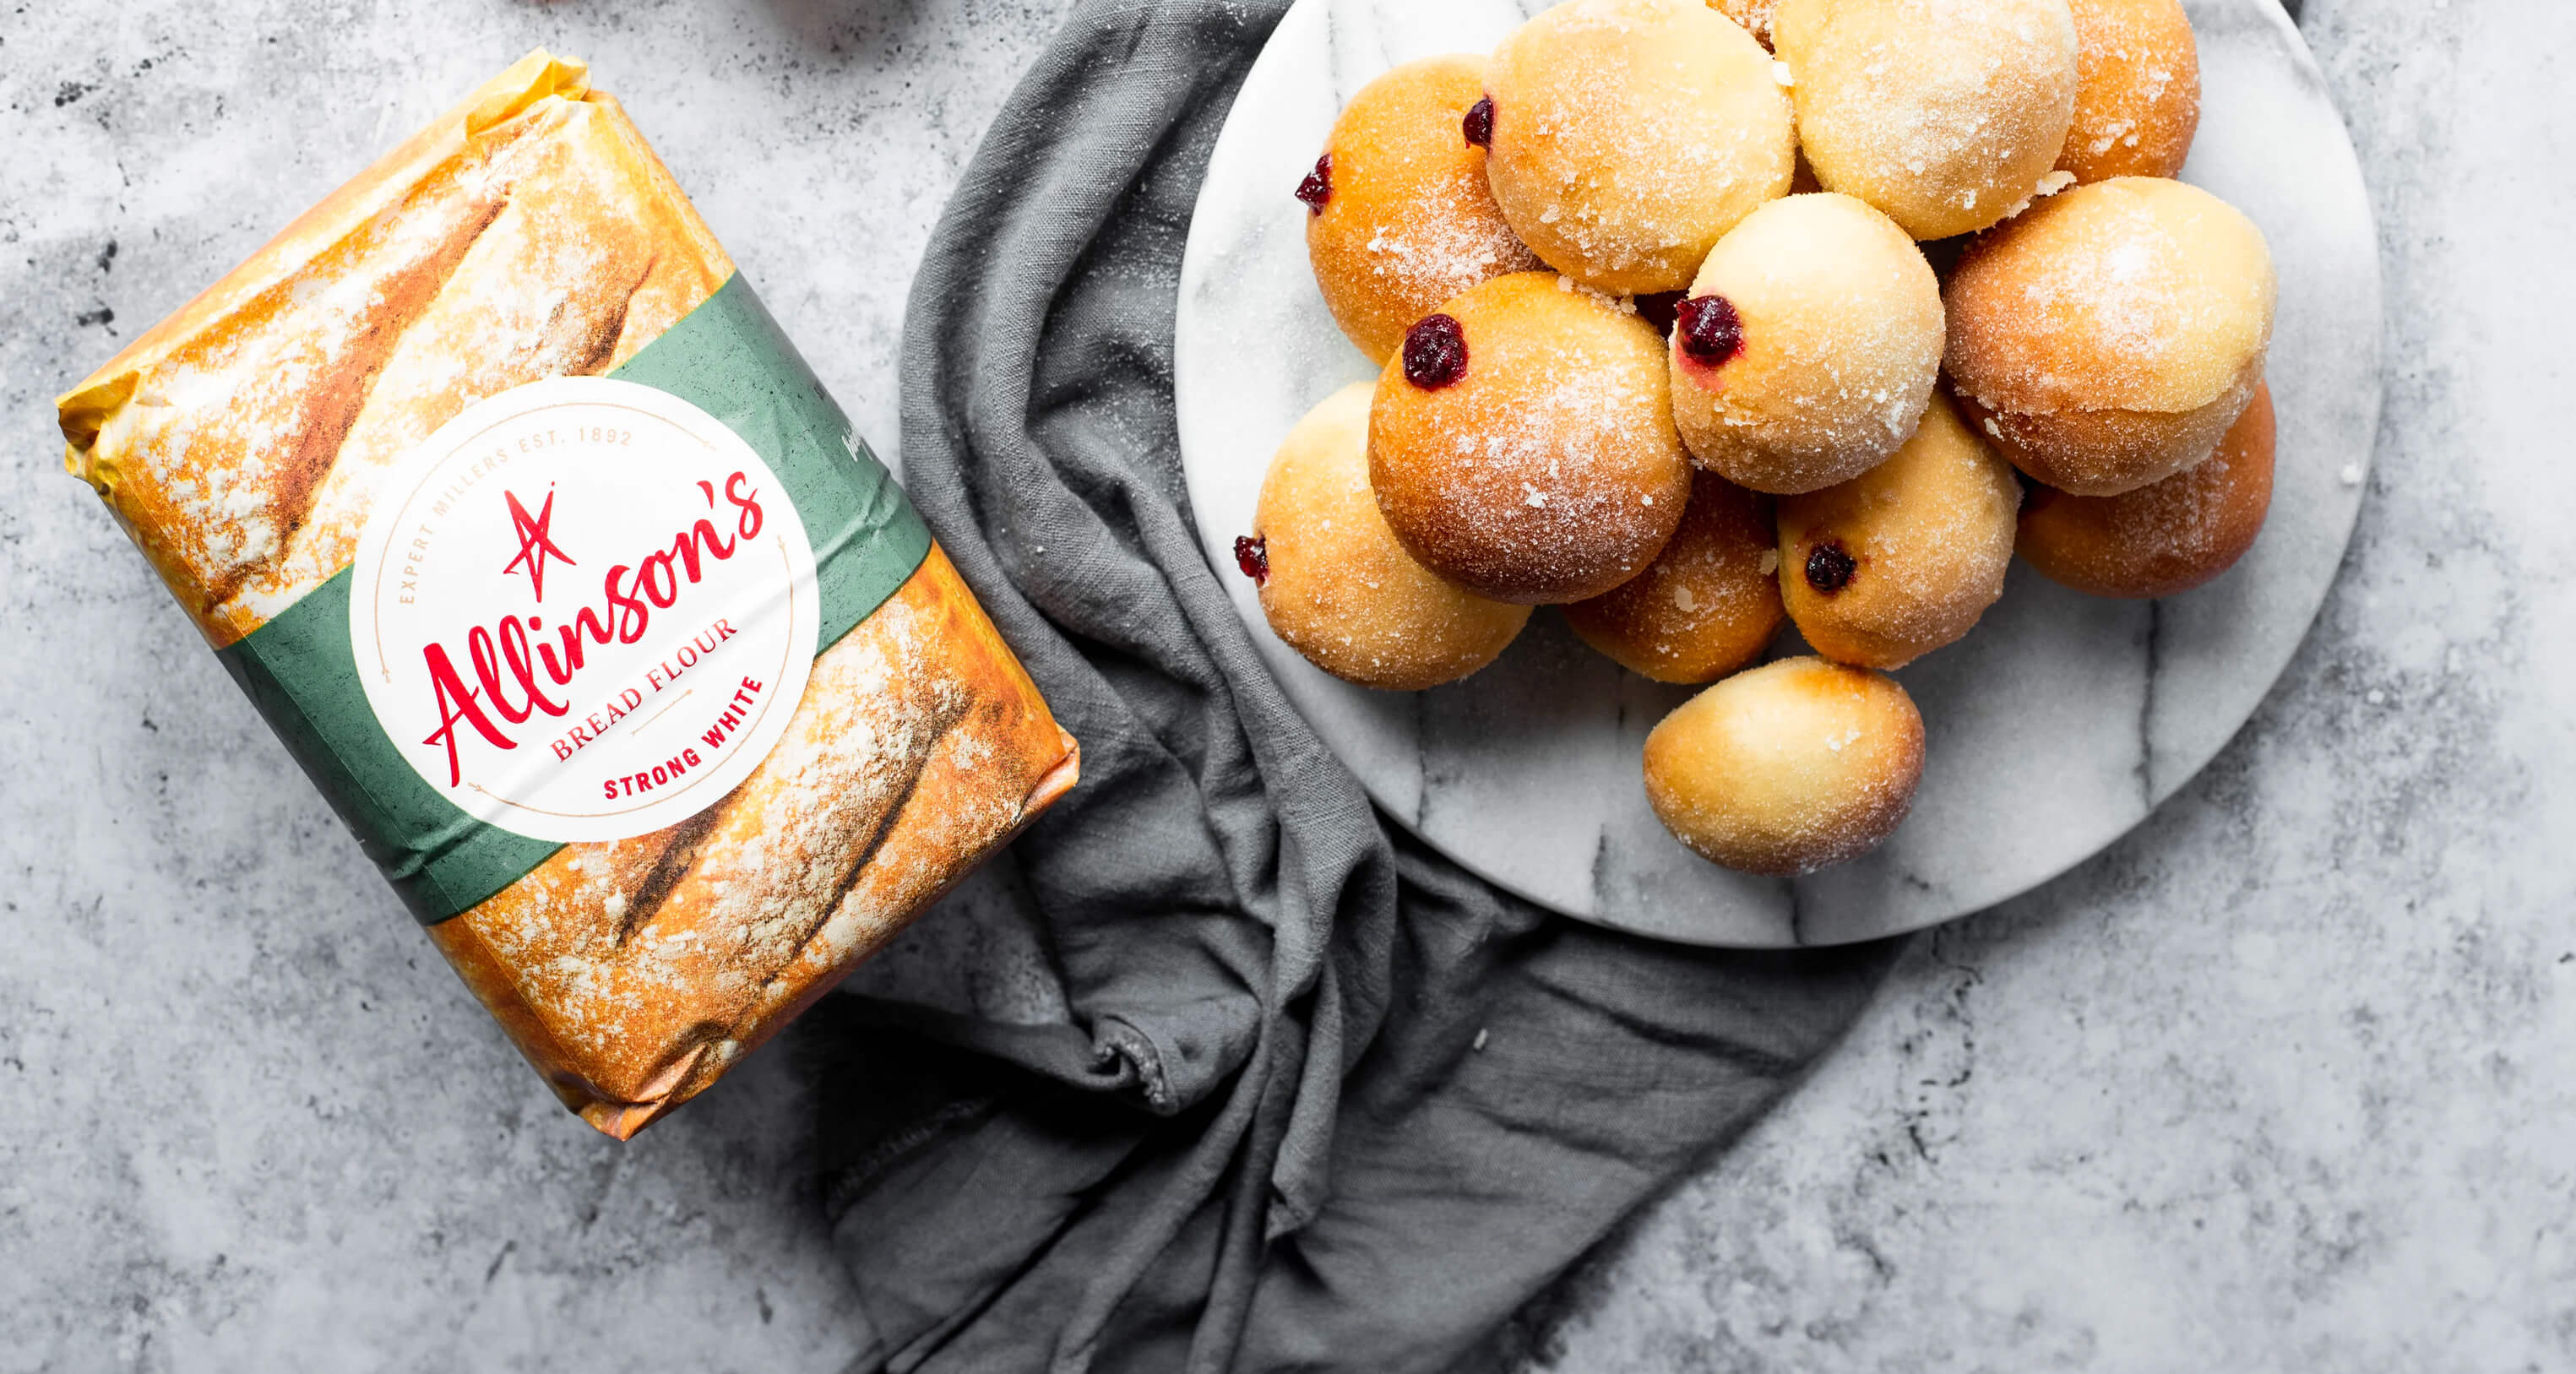 A plate piled with baked doughnuts oozing jam, alongside a pack of Allinson's Strong White Bread Flour.